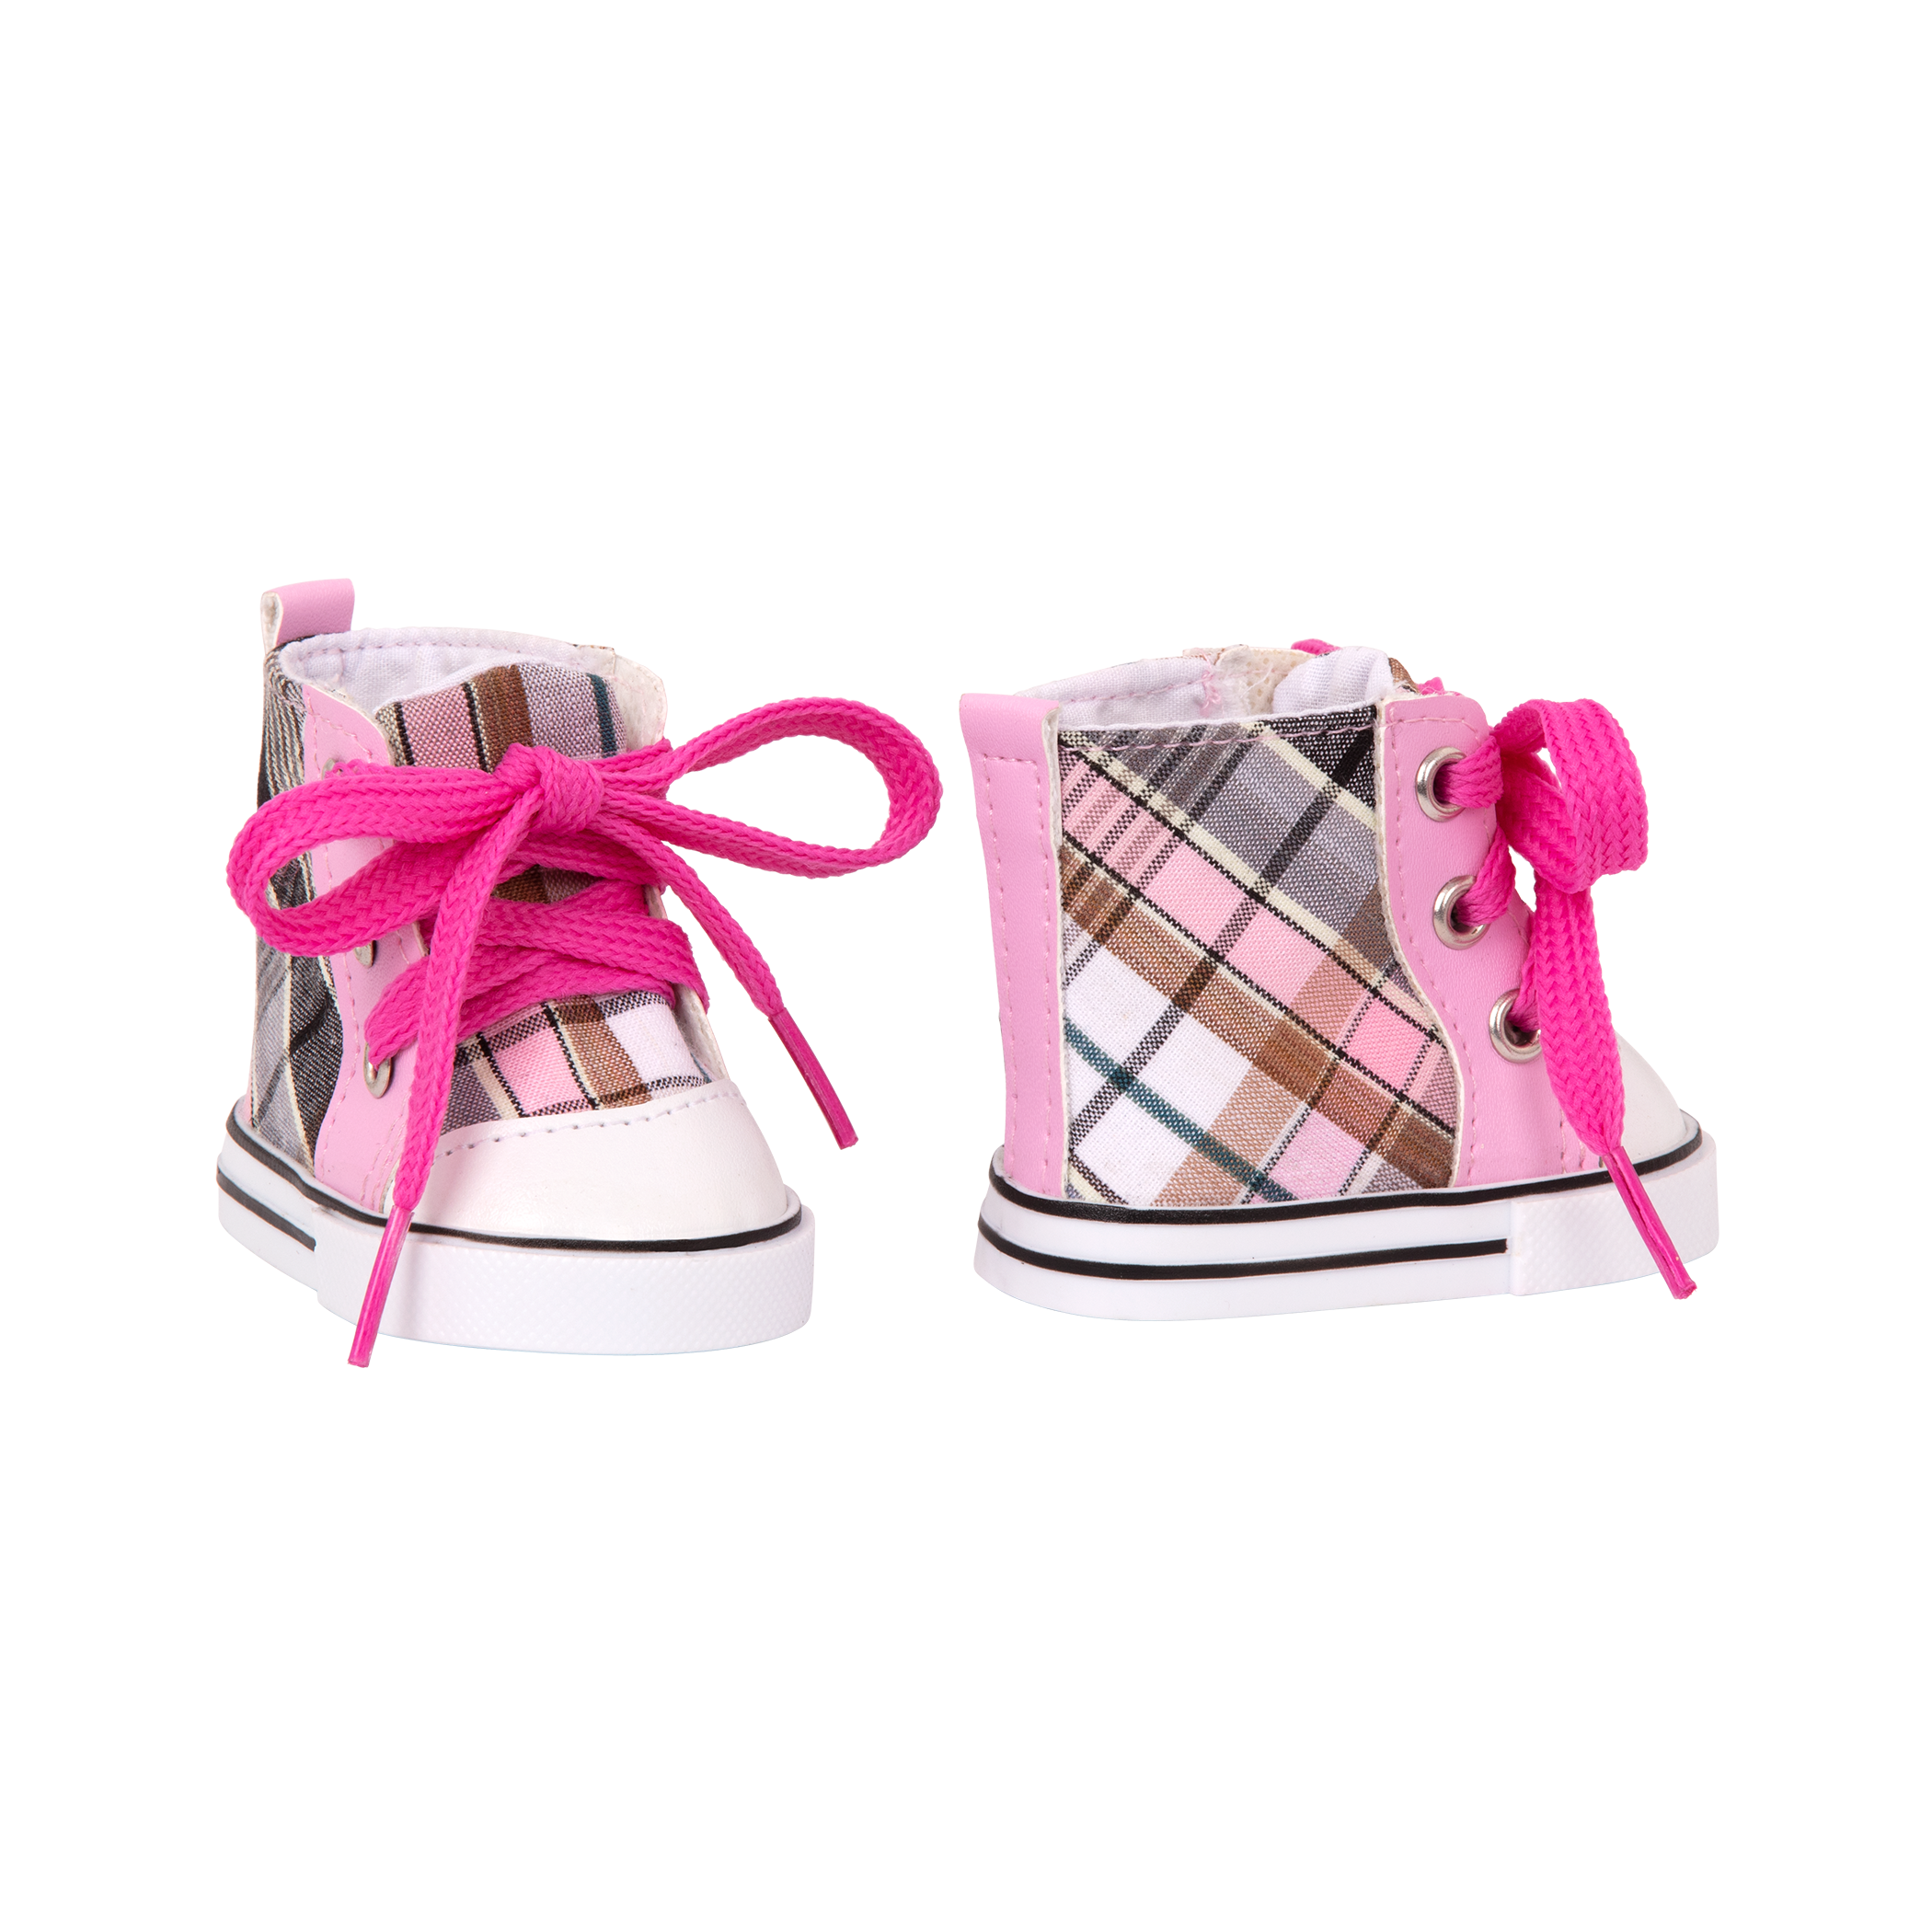 Plaid All Over Shoes for 18-inch Dolls